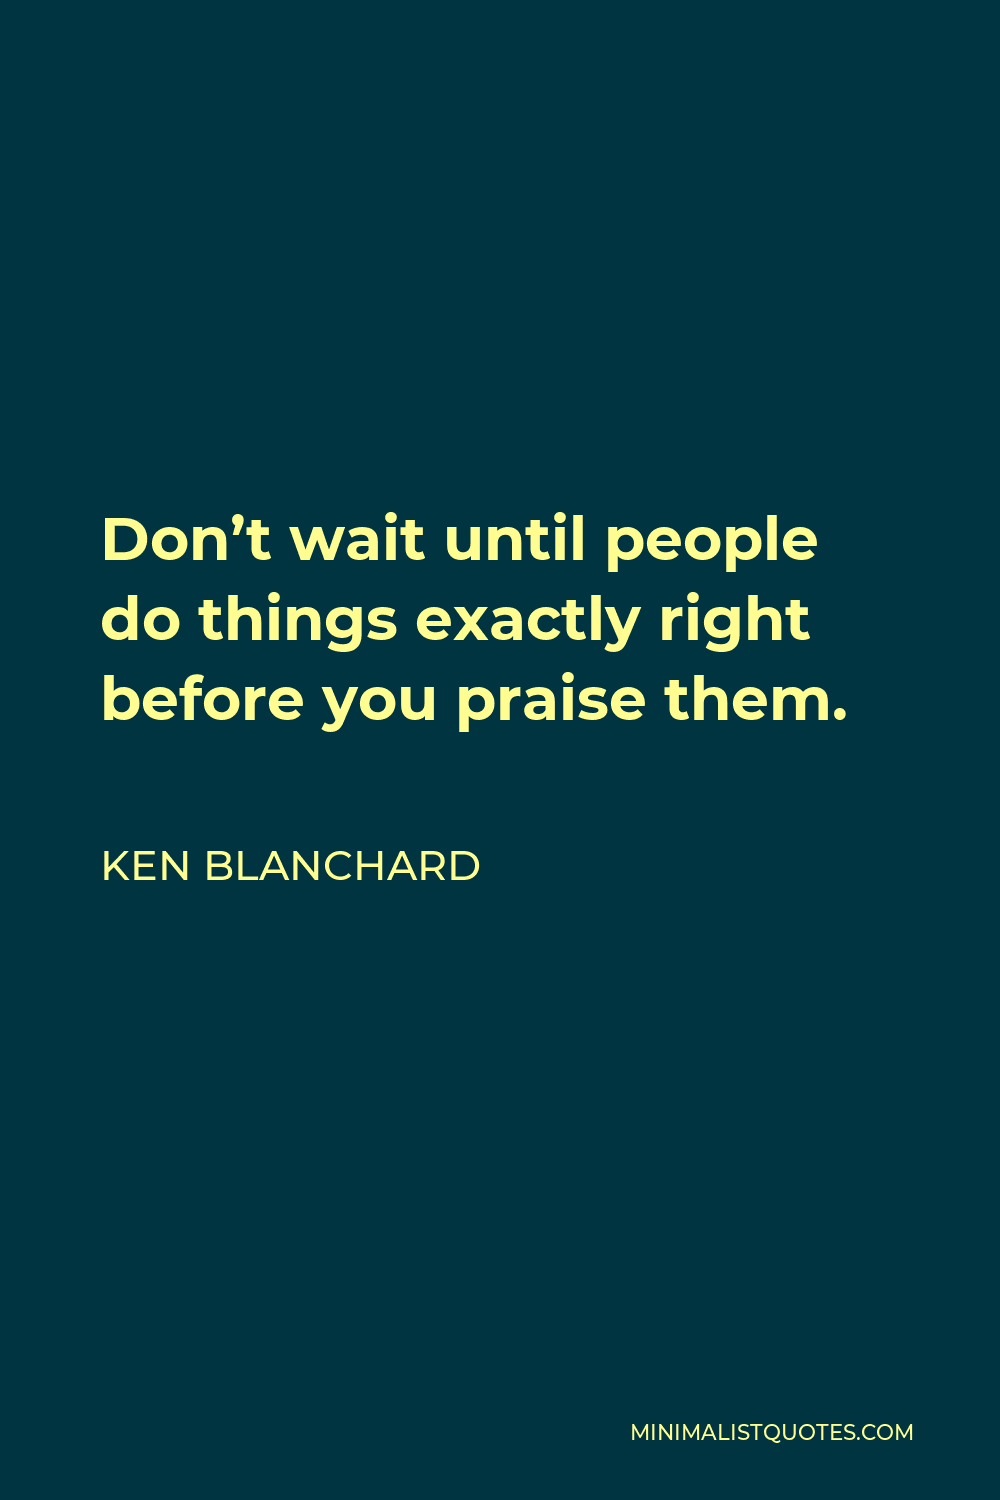 Ken Blanchard Quote - Don’t wait until people do things exactly right before you praise them.